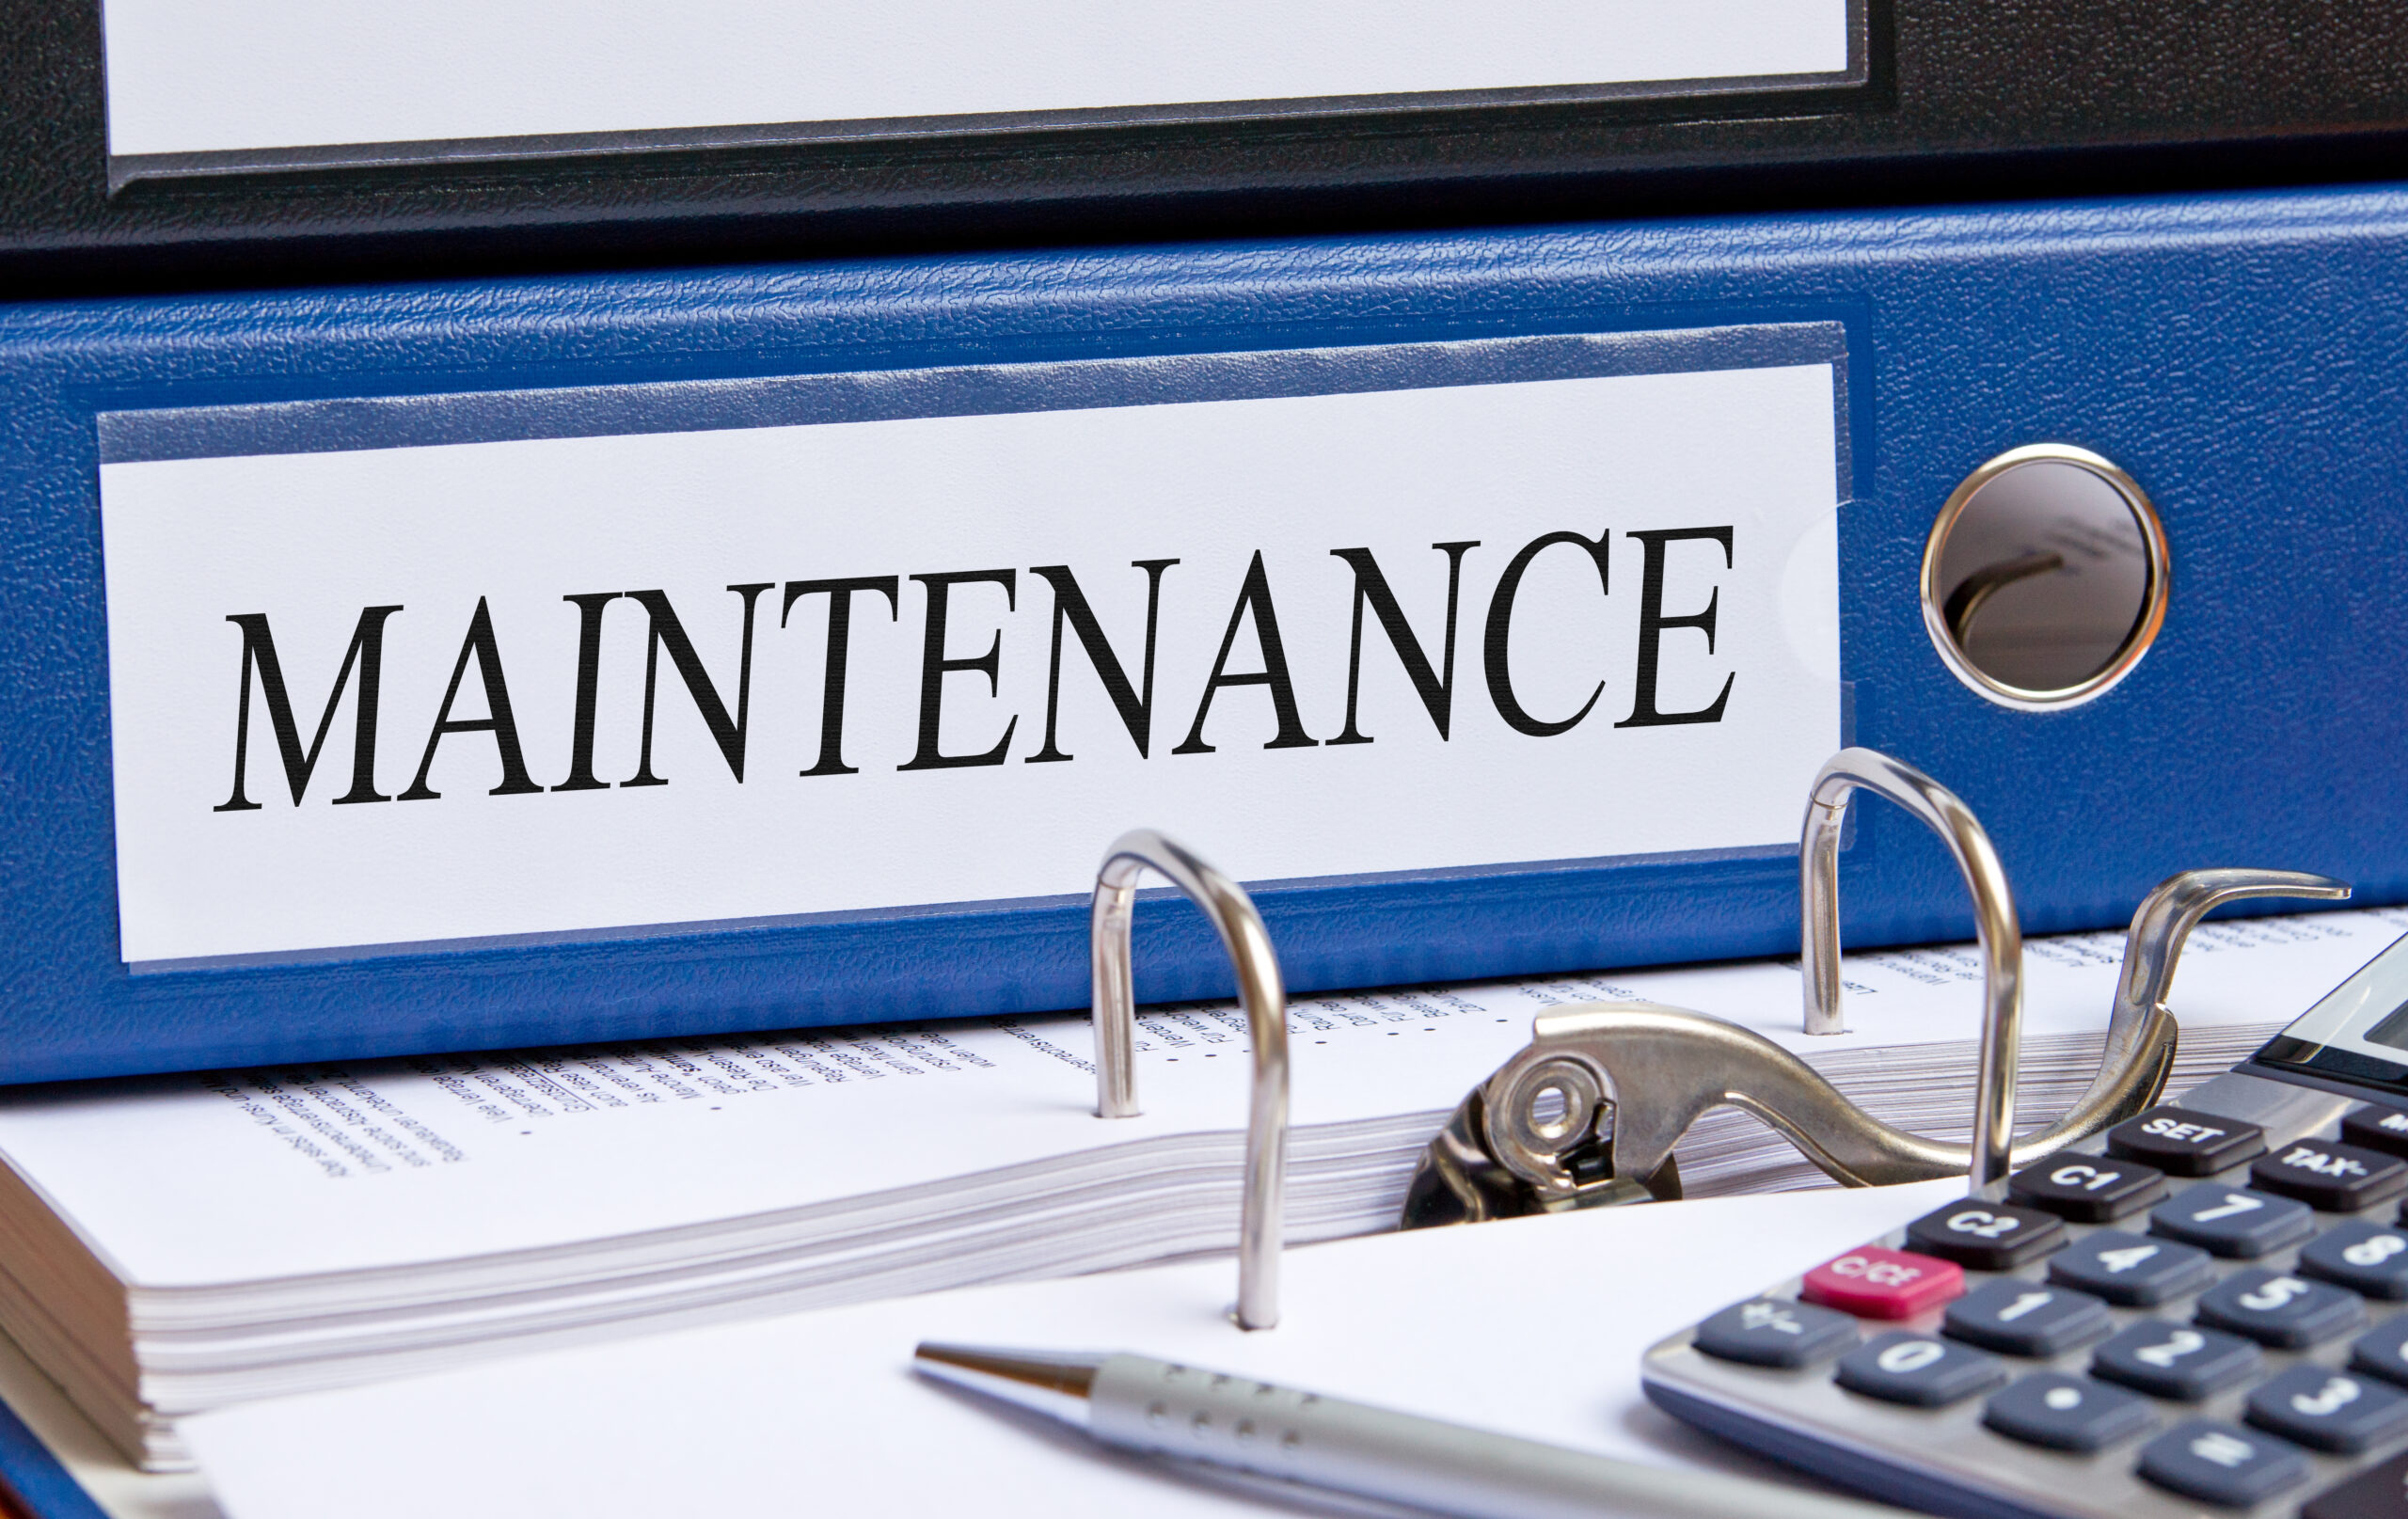 Our Guide to Planned Preventative Maintenance